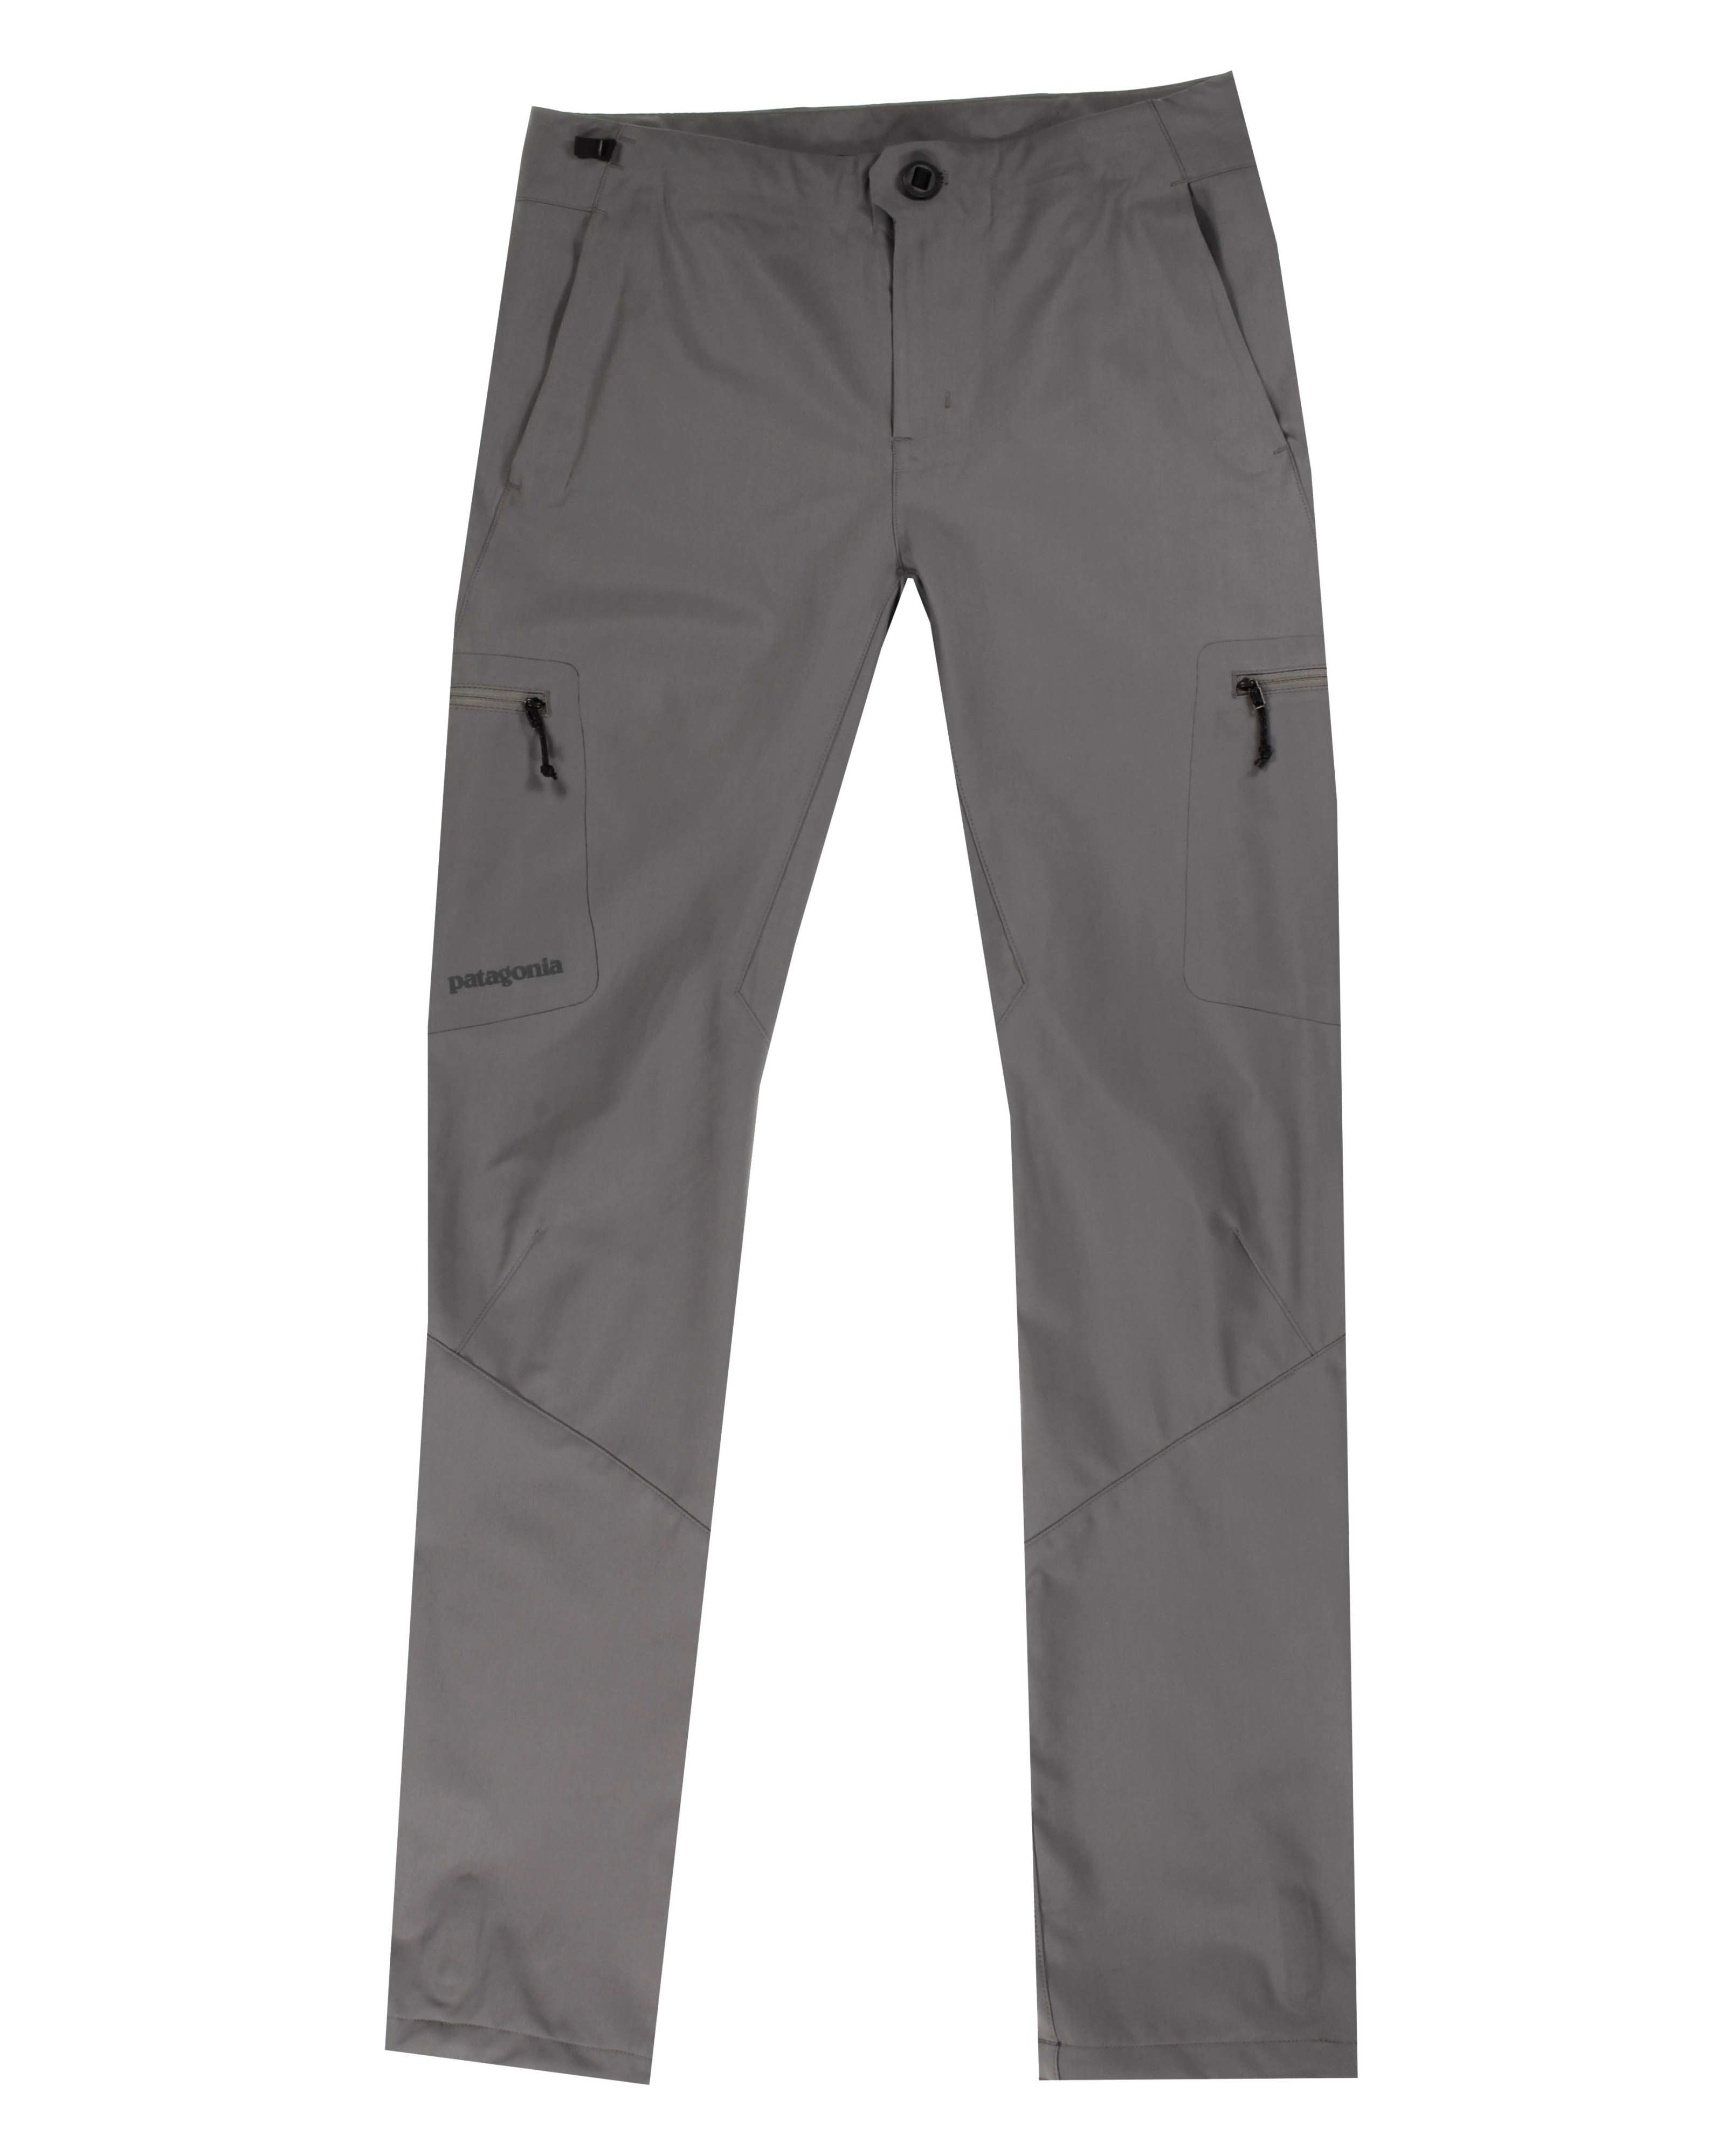 Men's Pants: Outdoor & Travel Pants by Patagonia